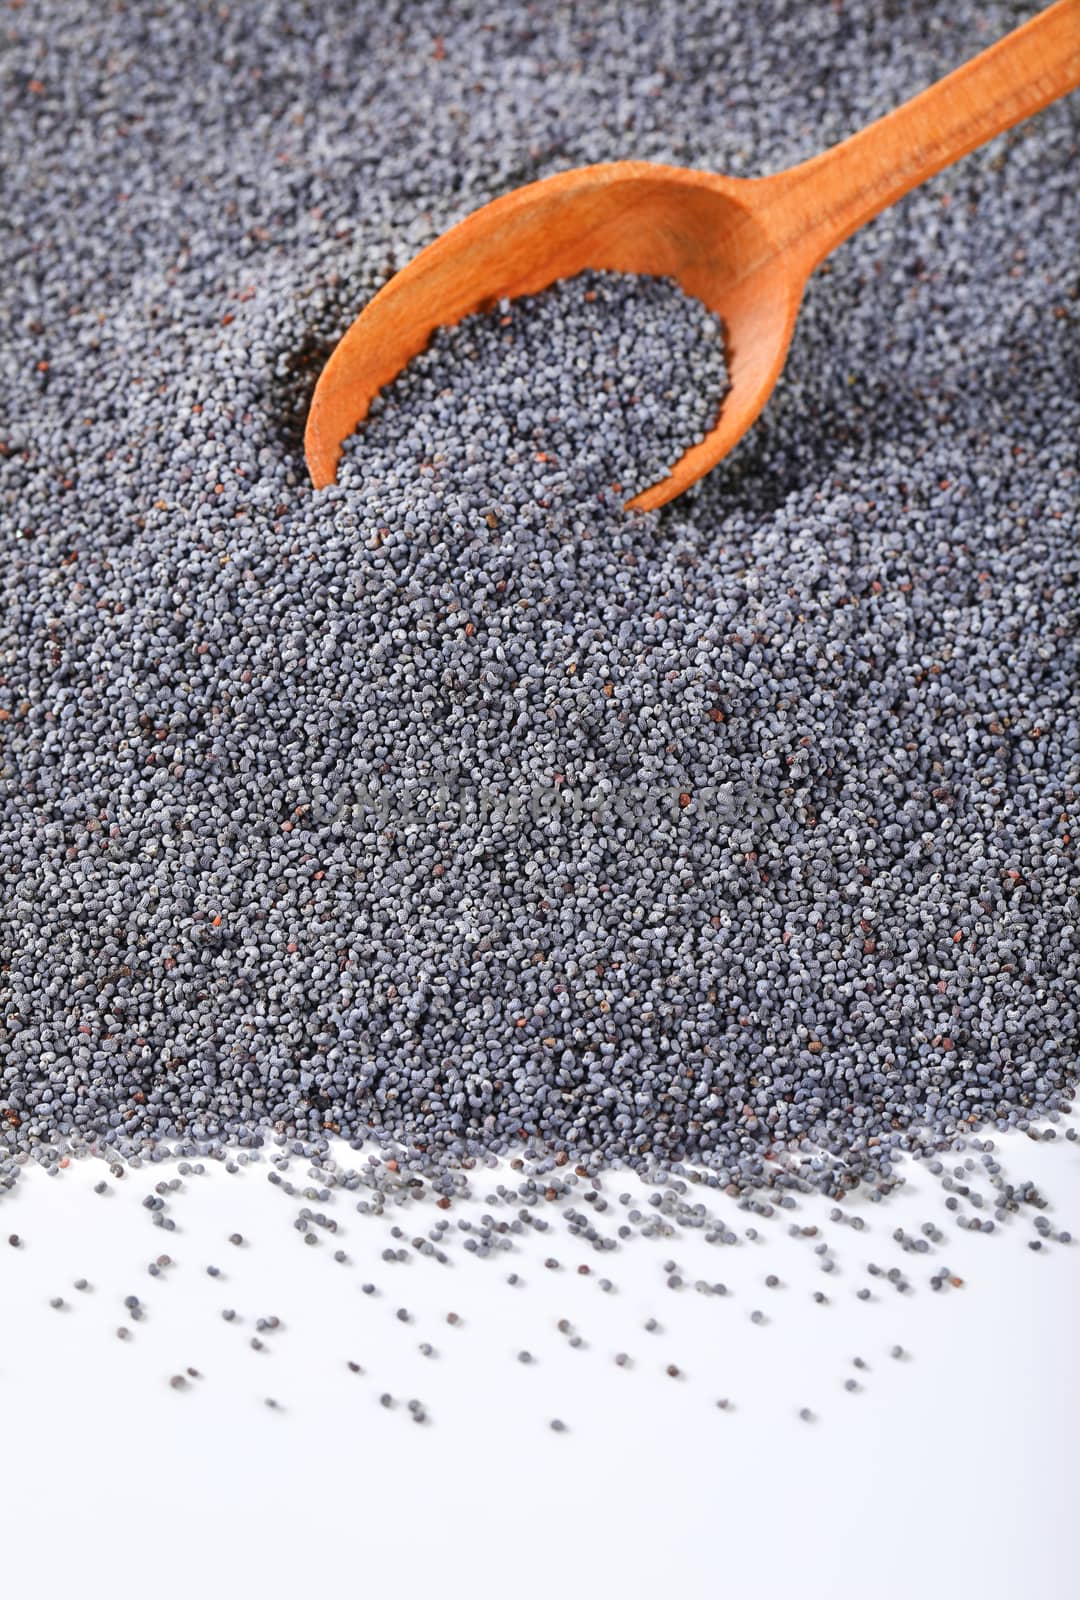 bulk poppy seeds and wooden spoon